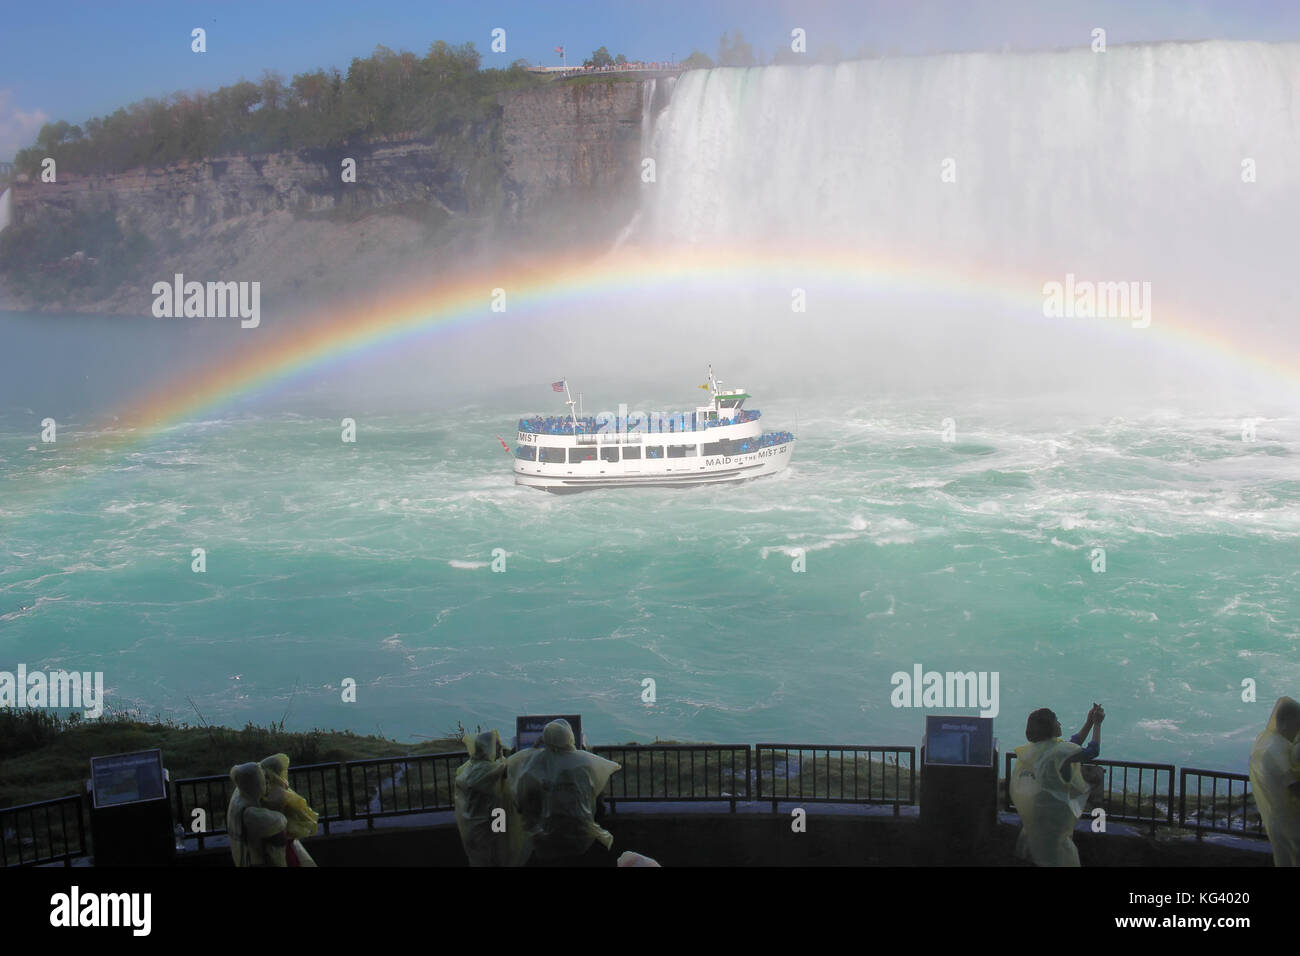 NIAGARA FALLS, CANADA - MAY 29 2017: Tourists watch as the Maid of the Mist tour boat approaches the raging cataracts of Horseshoe Falls under a compl Stock Photo